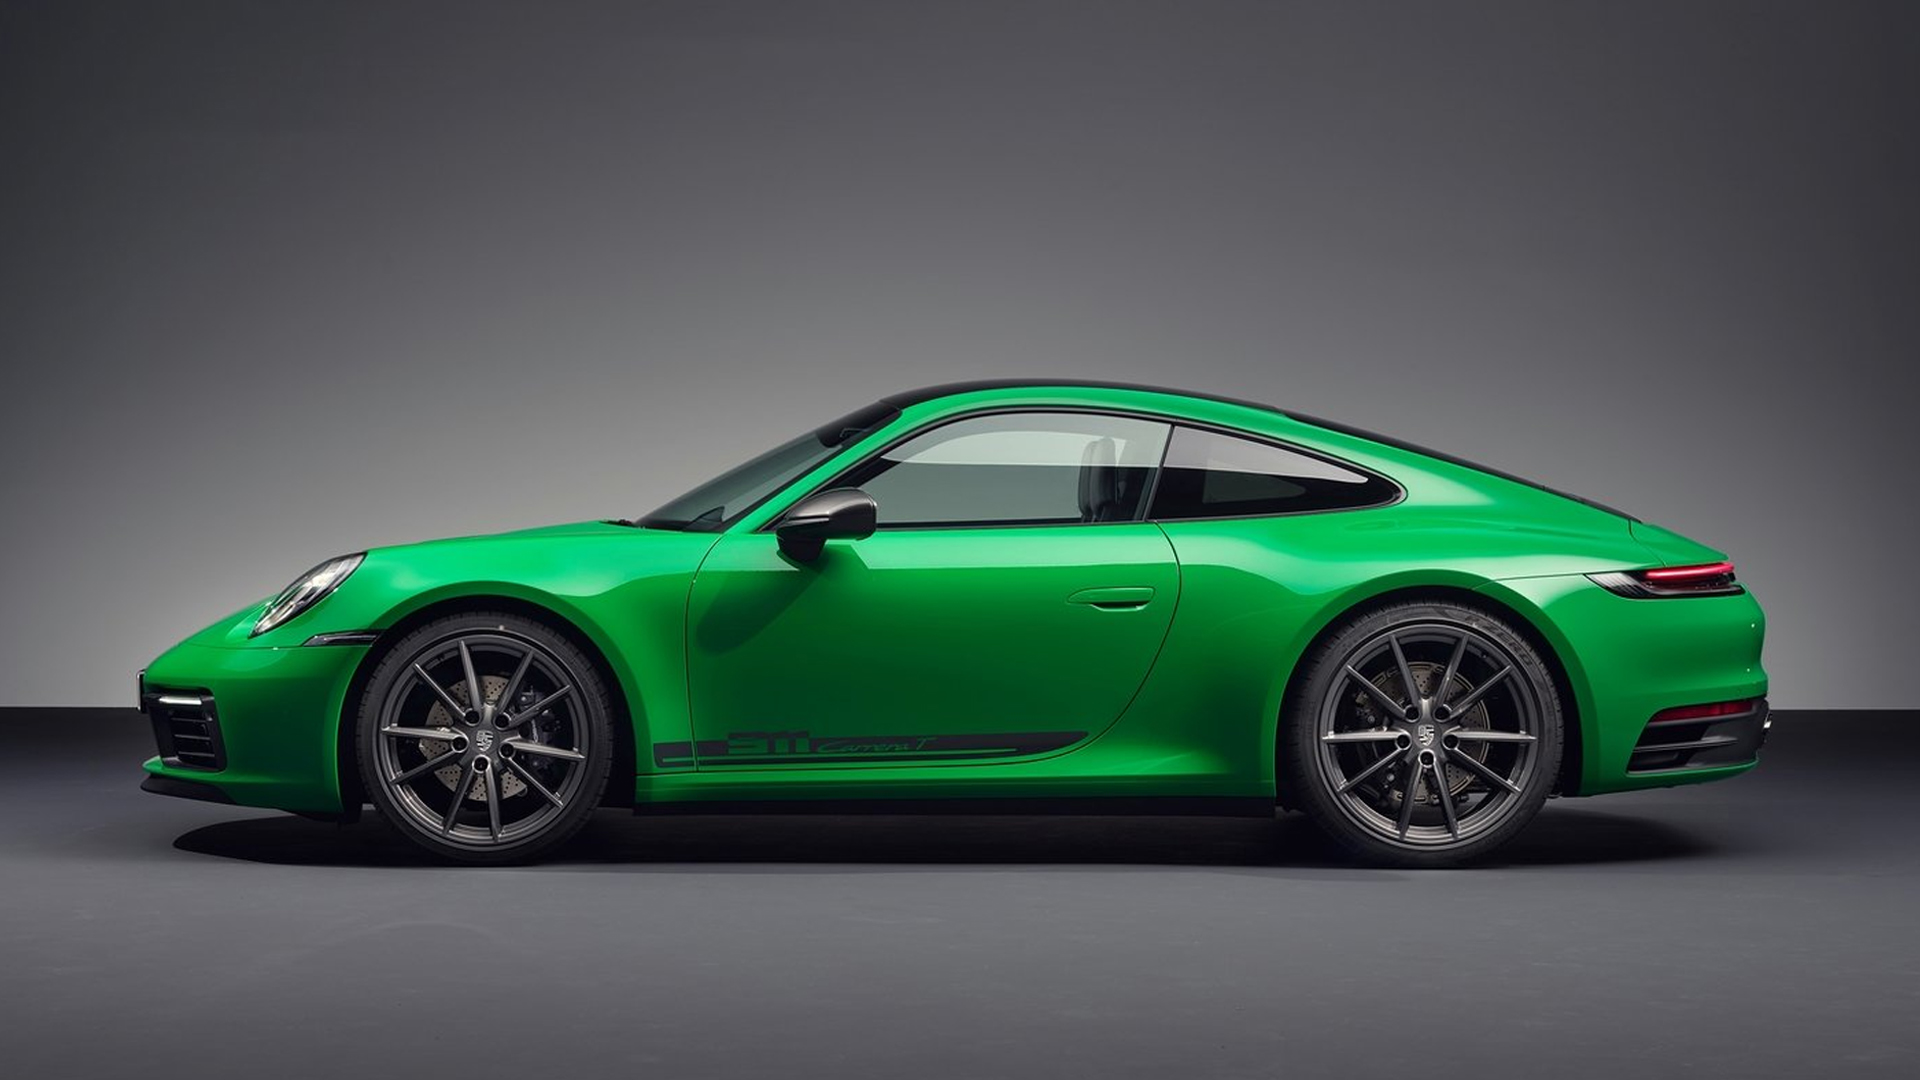 Porsche 911 Will Have a Combustion Engine for ‘As Long as Possible’